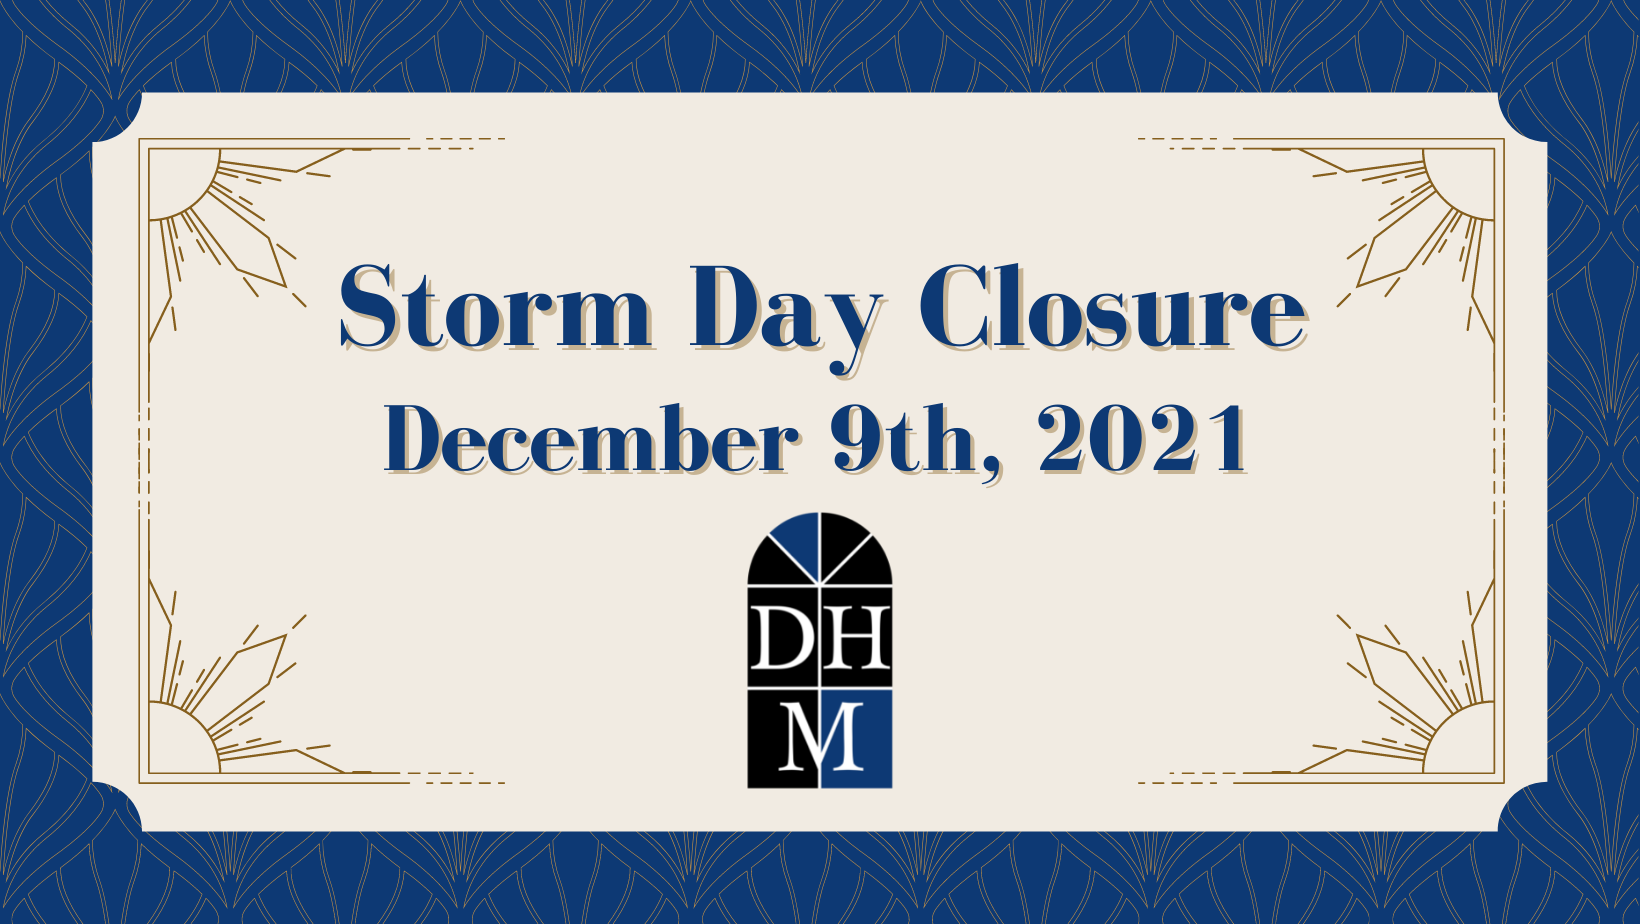 Storm Day Closure December 9th 2021